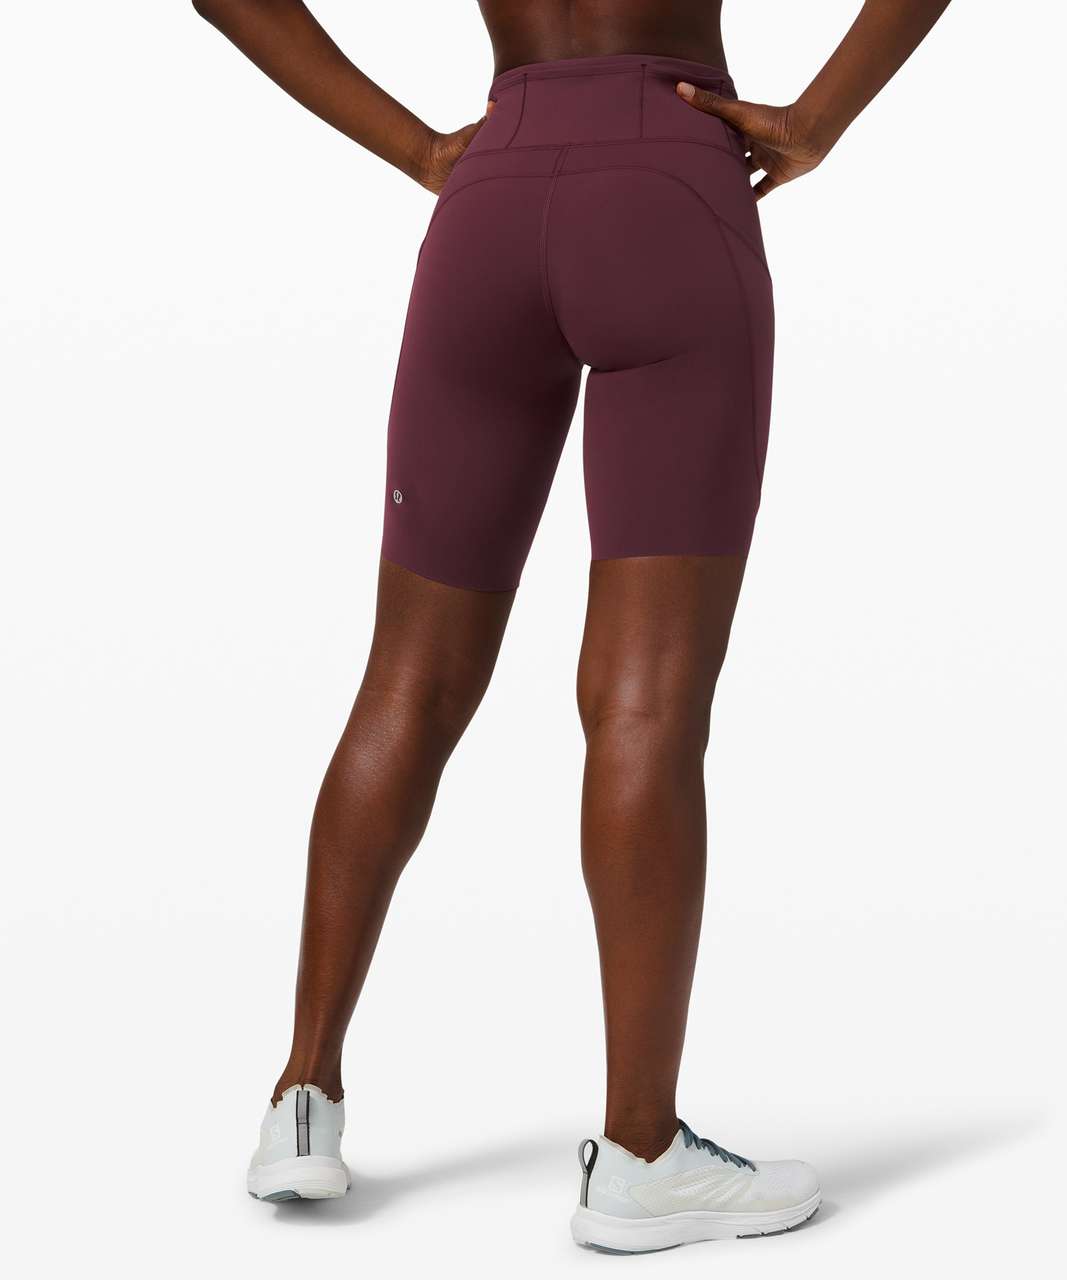 Lululemon Fast And Free Short 10" *Non-Reflective - Cassis